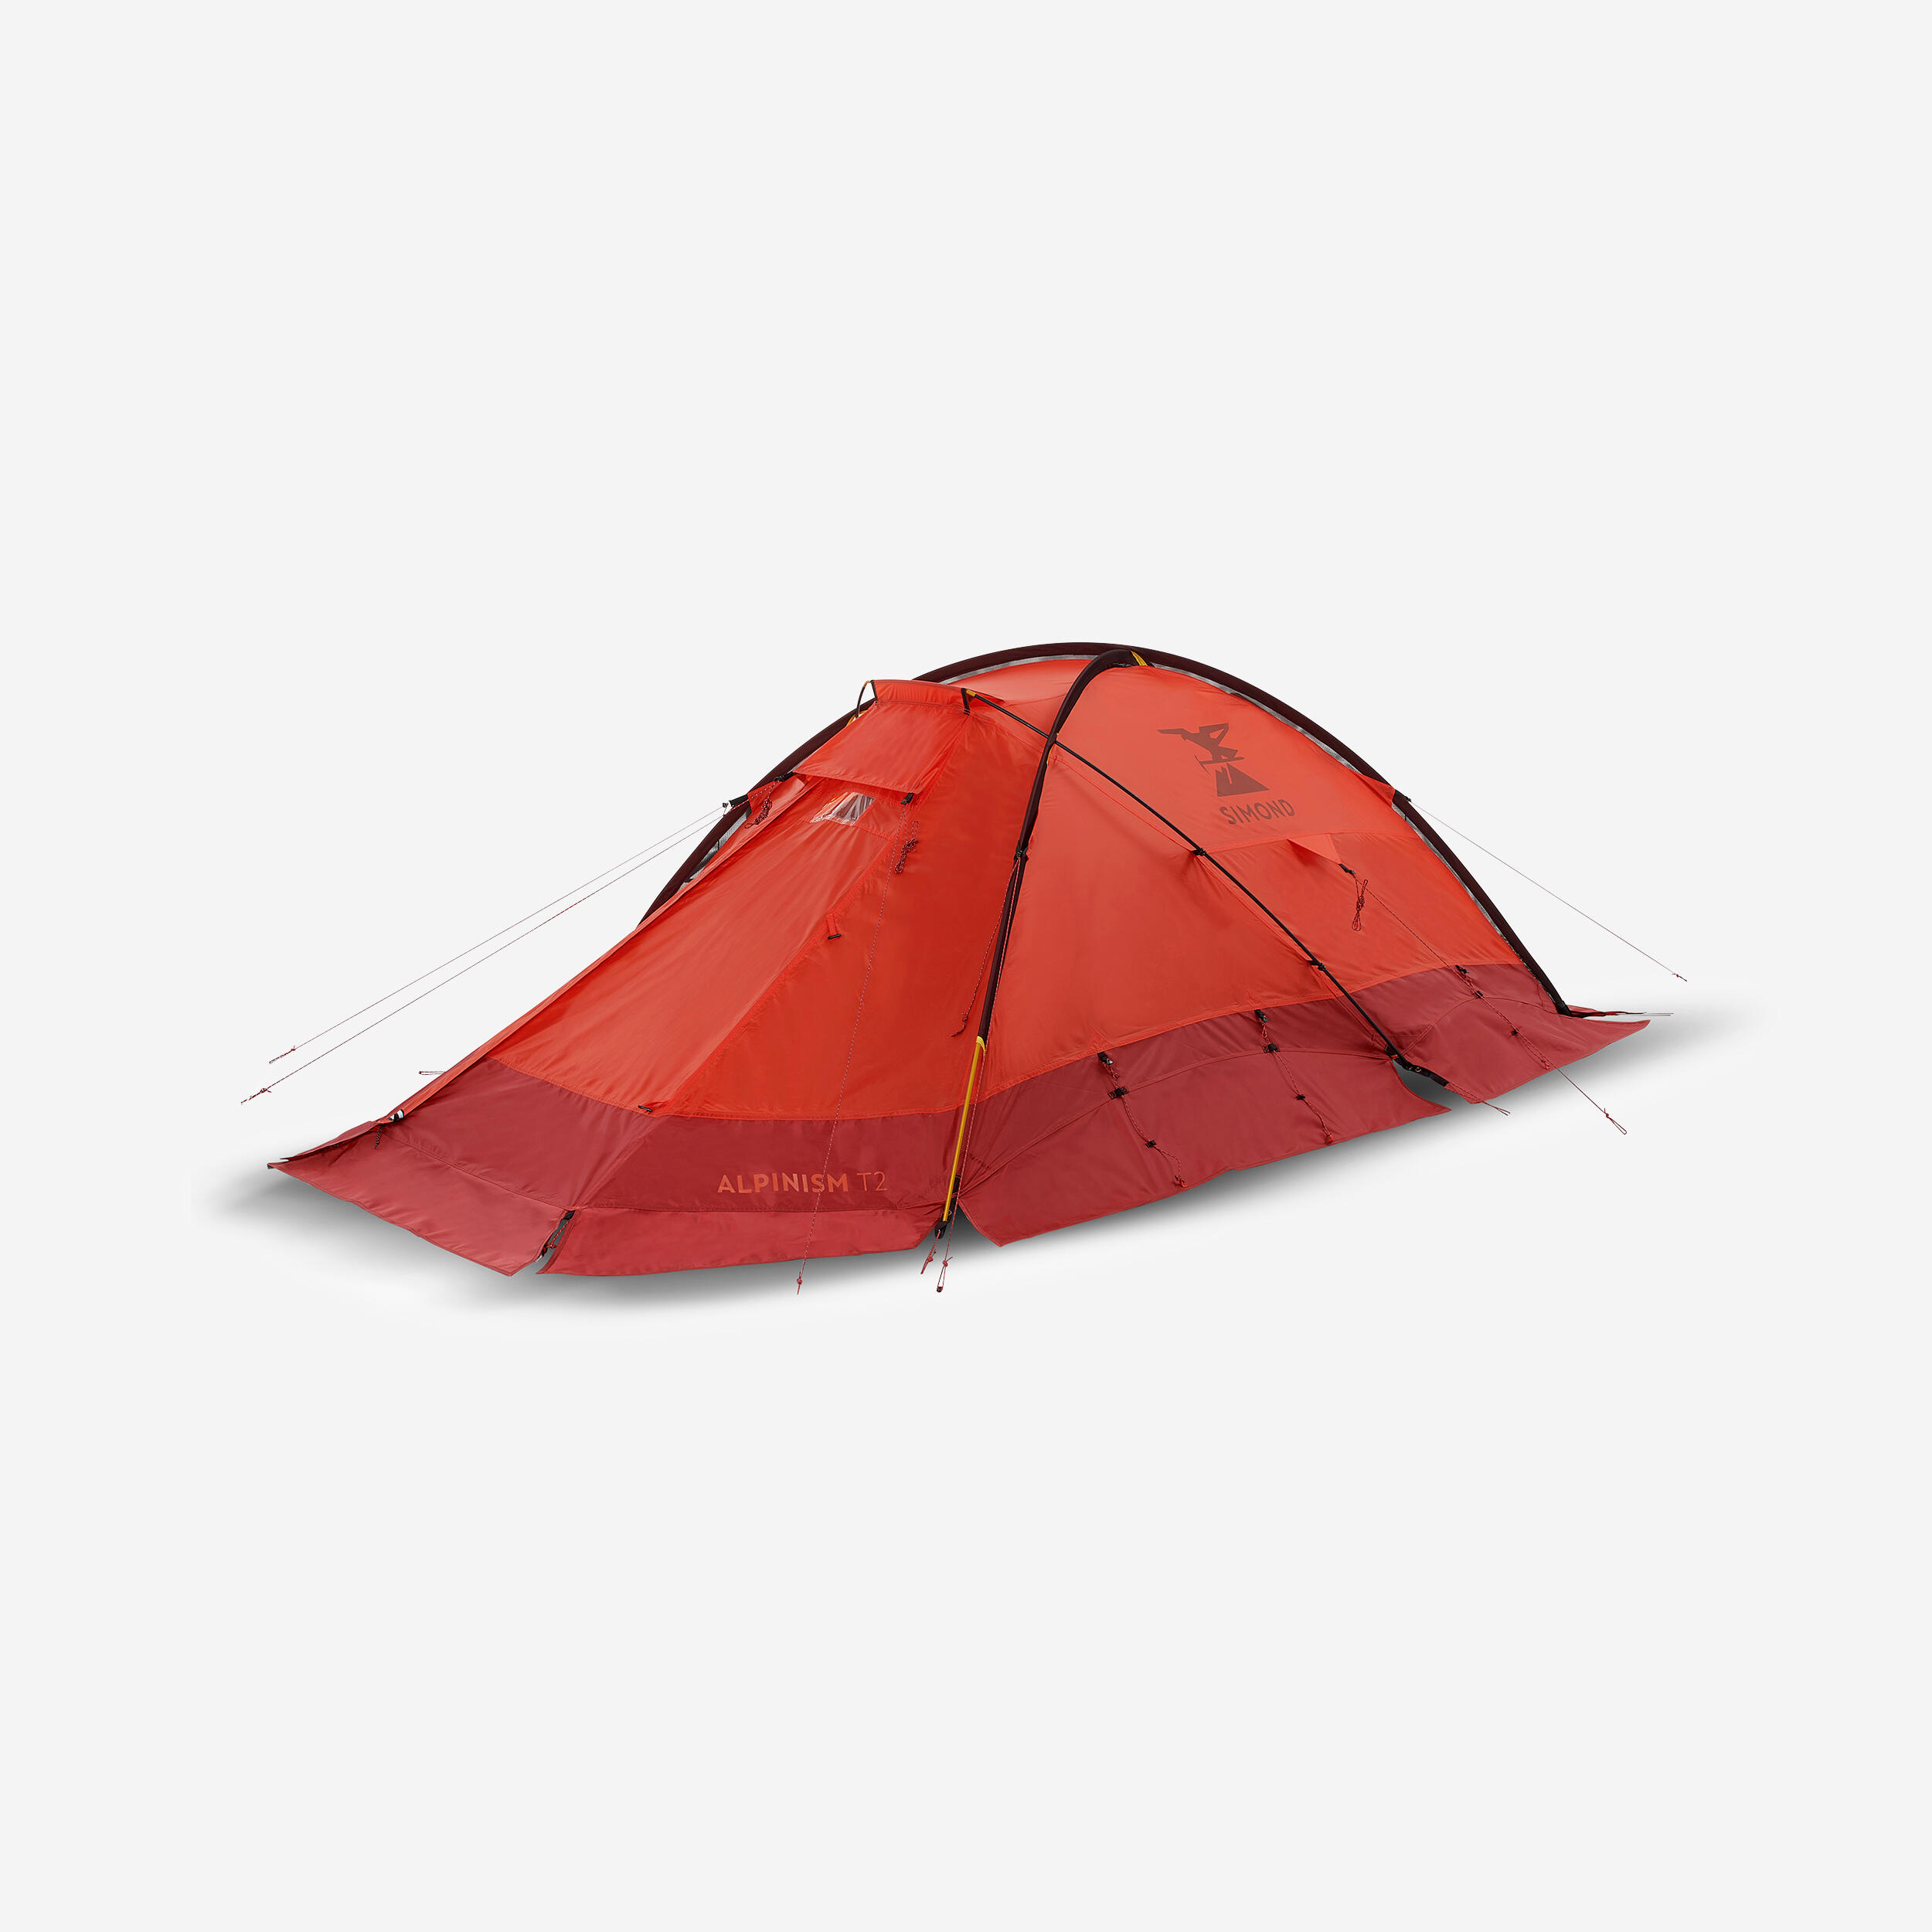 2-person mountaineering tent - Makalu T2 1/14